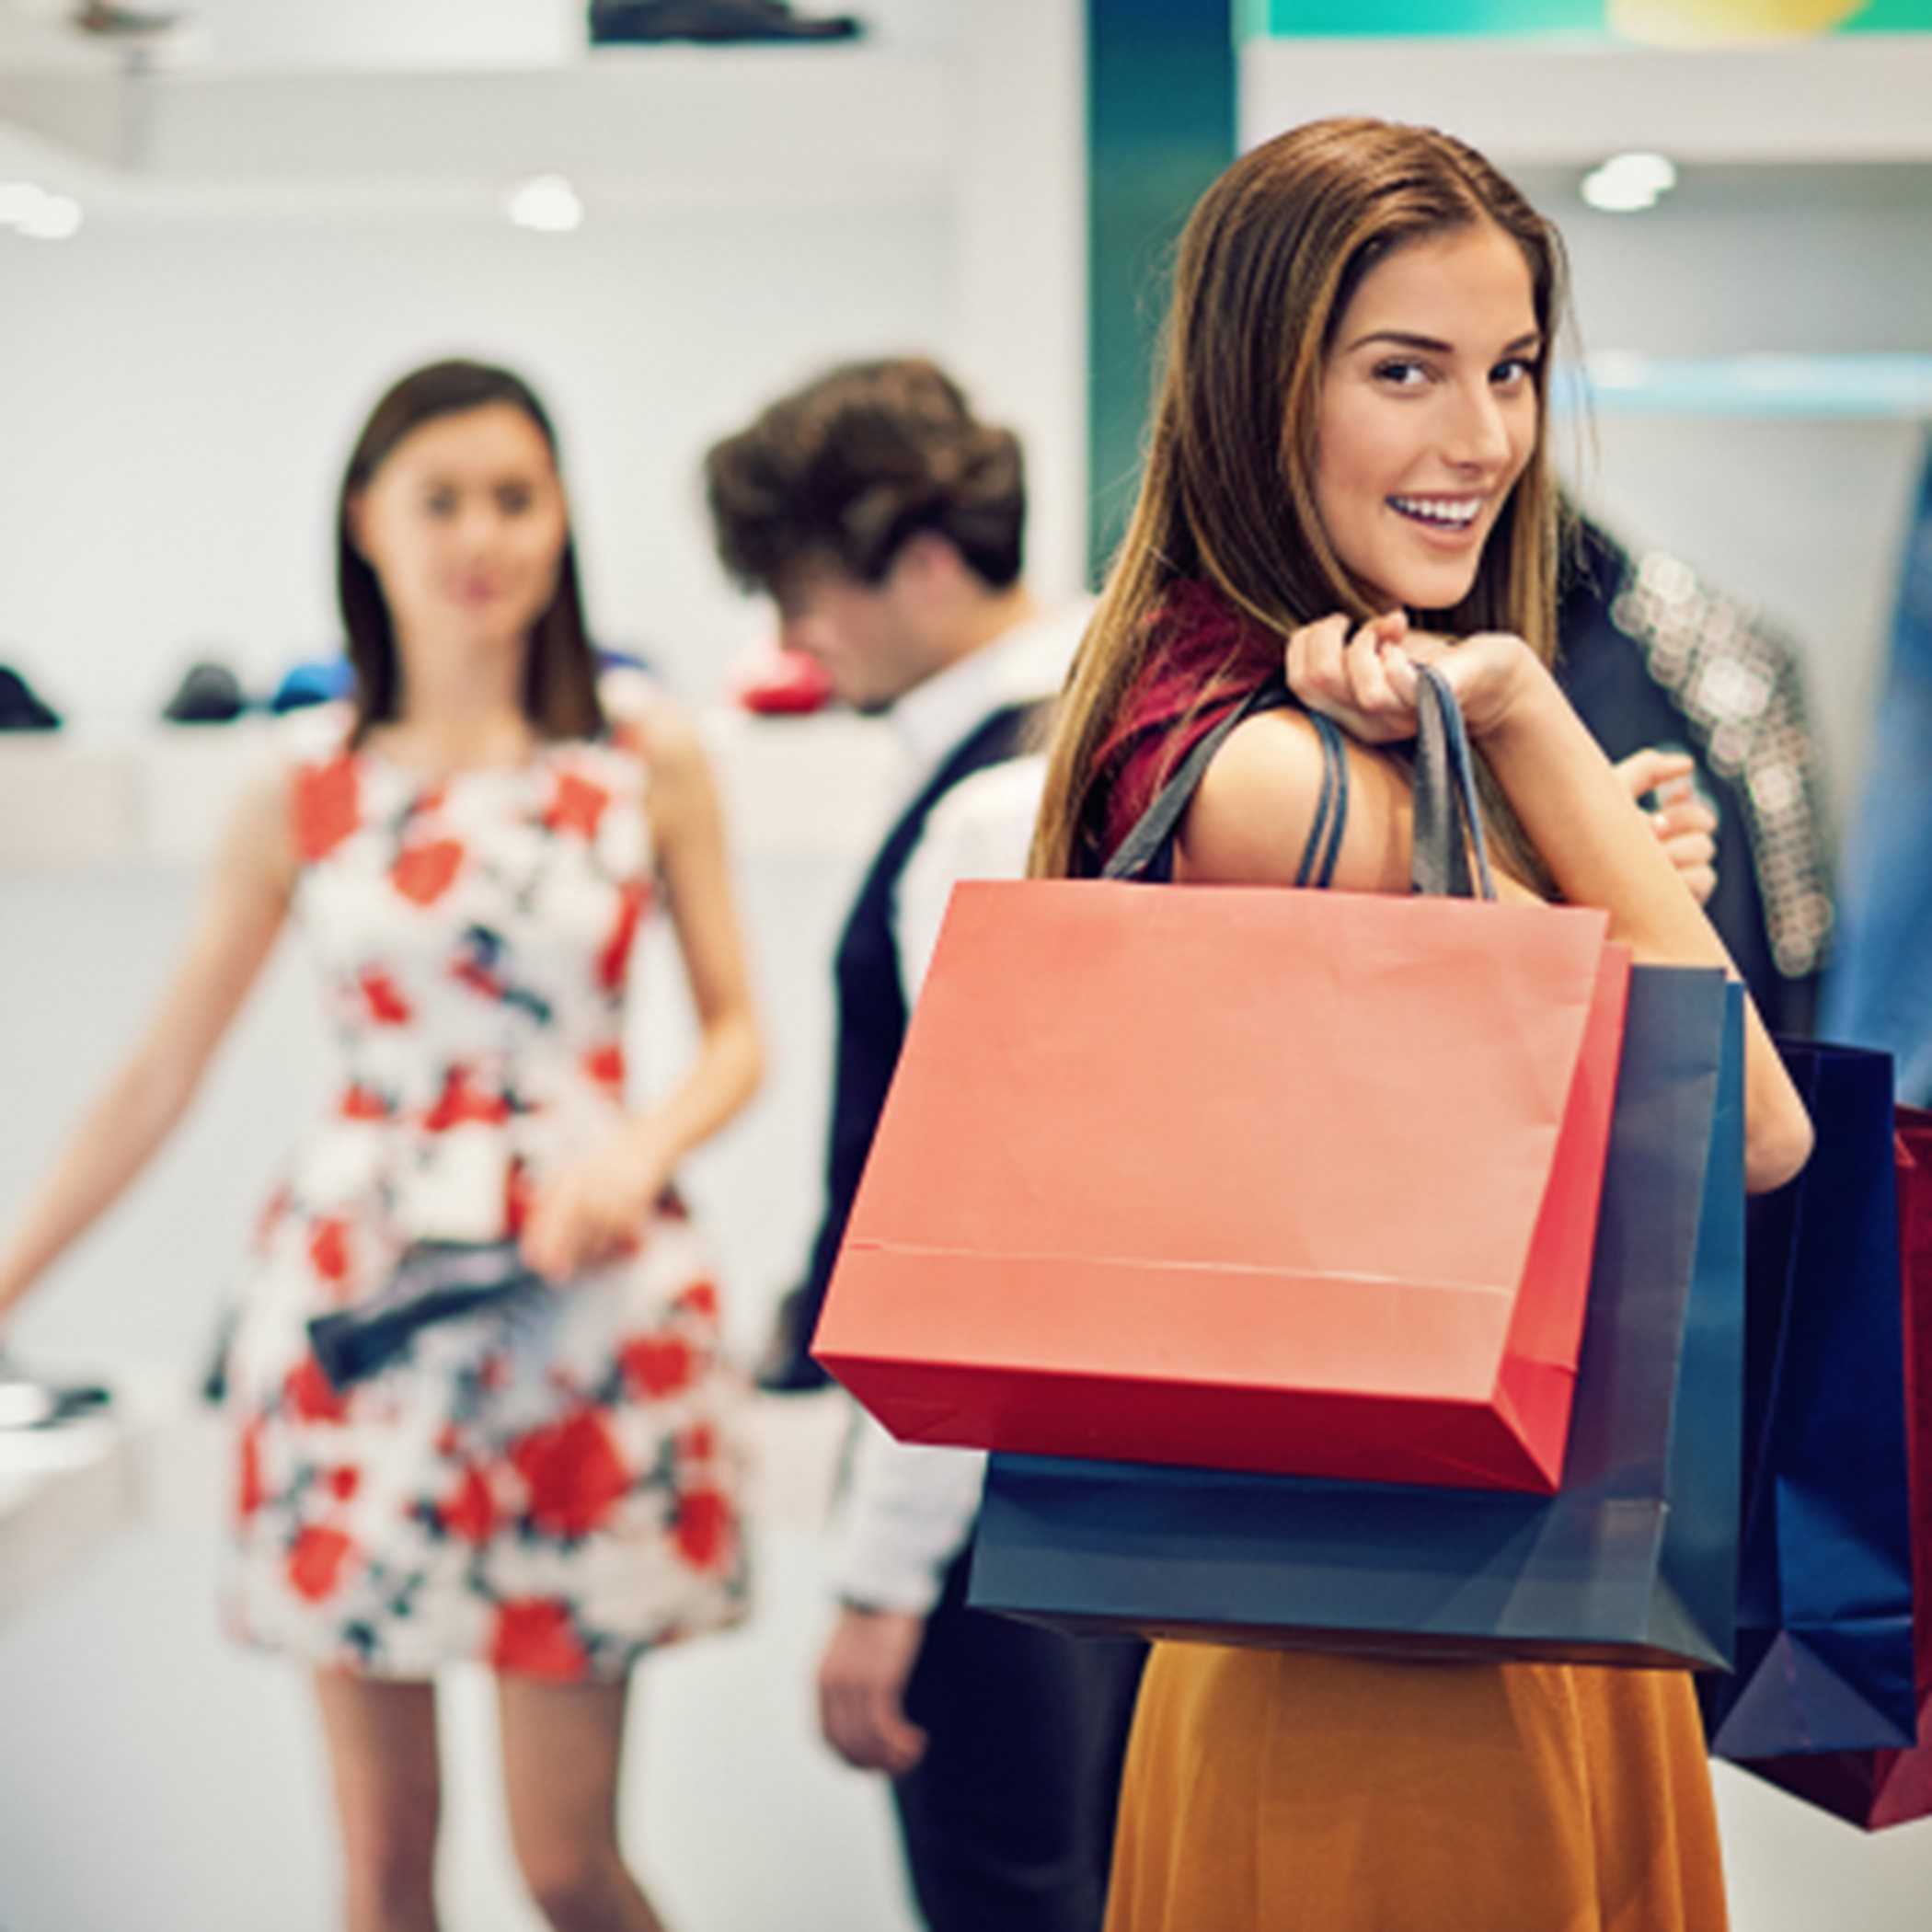 Woman smiling and holding shopping bags